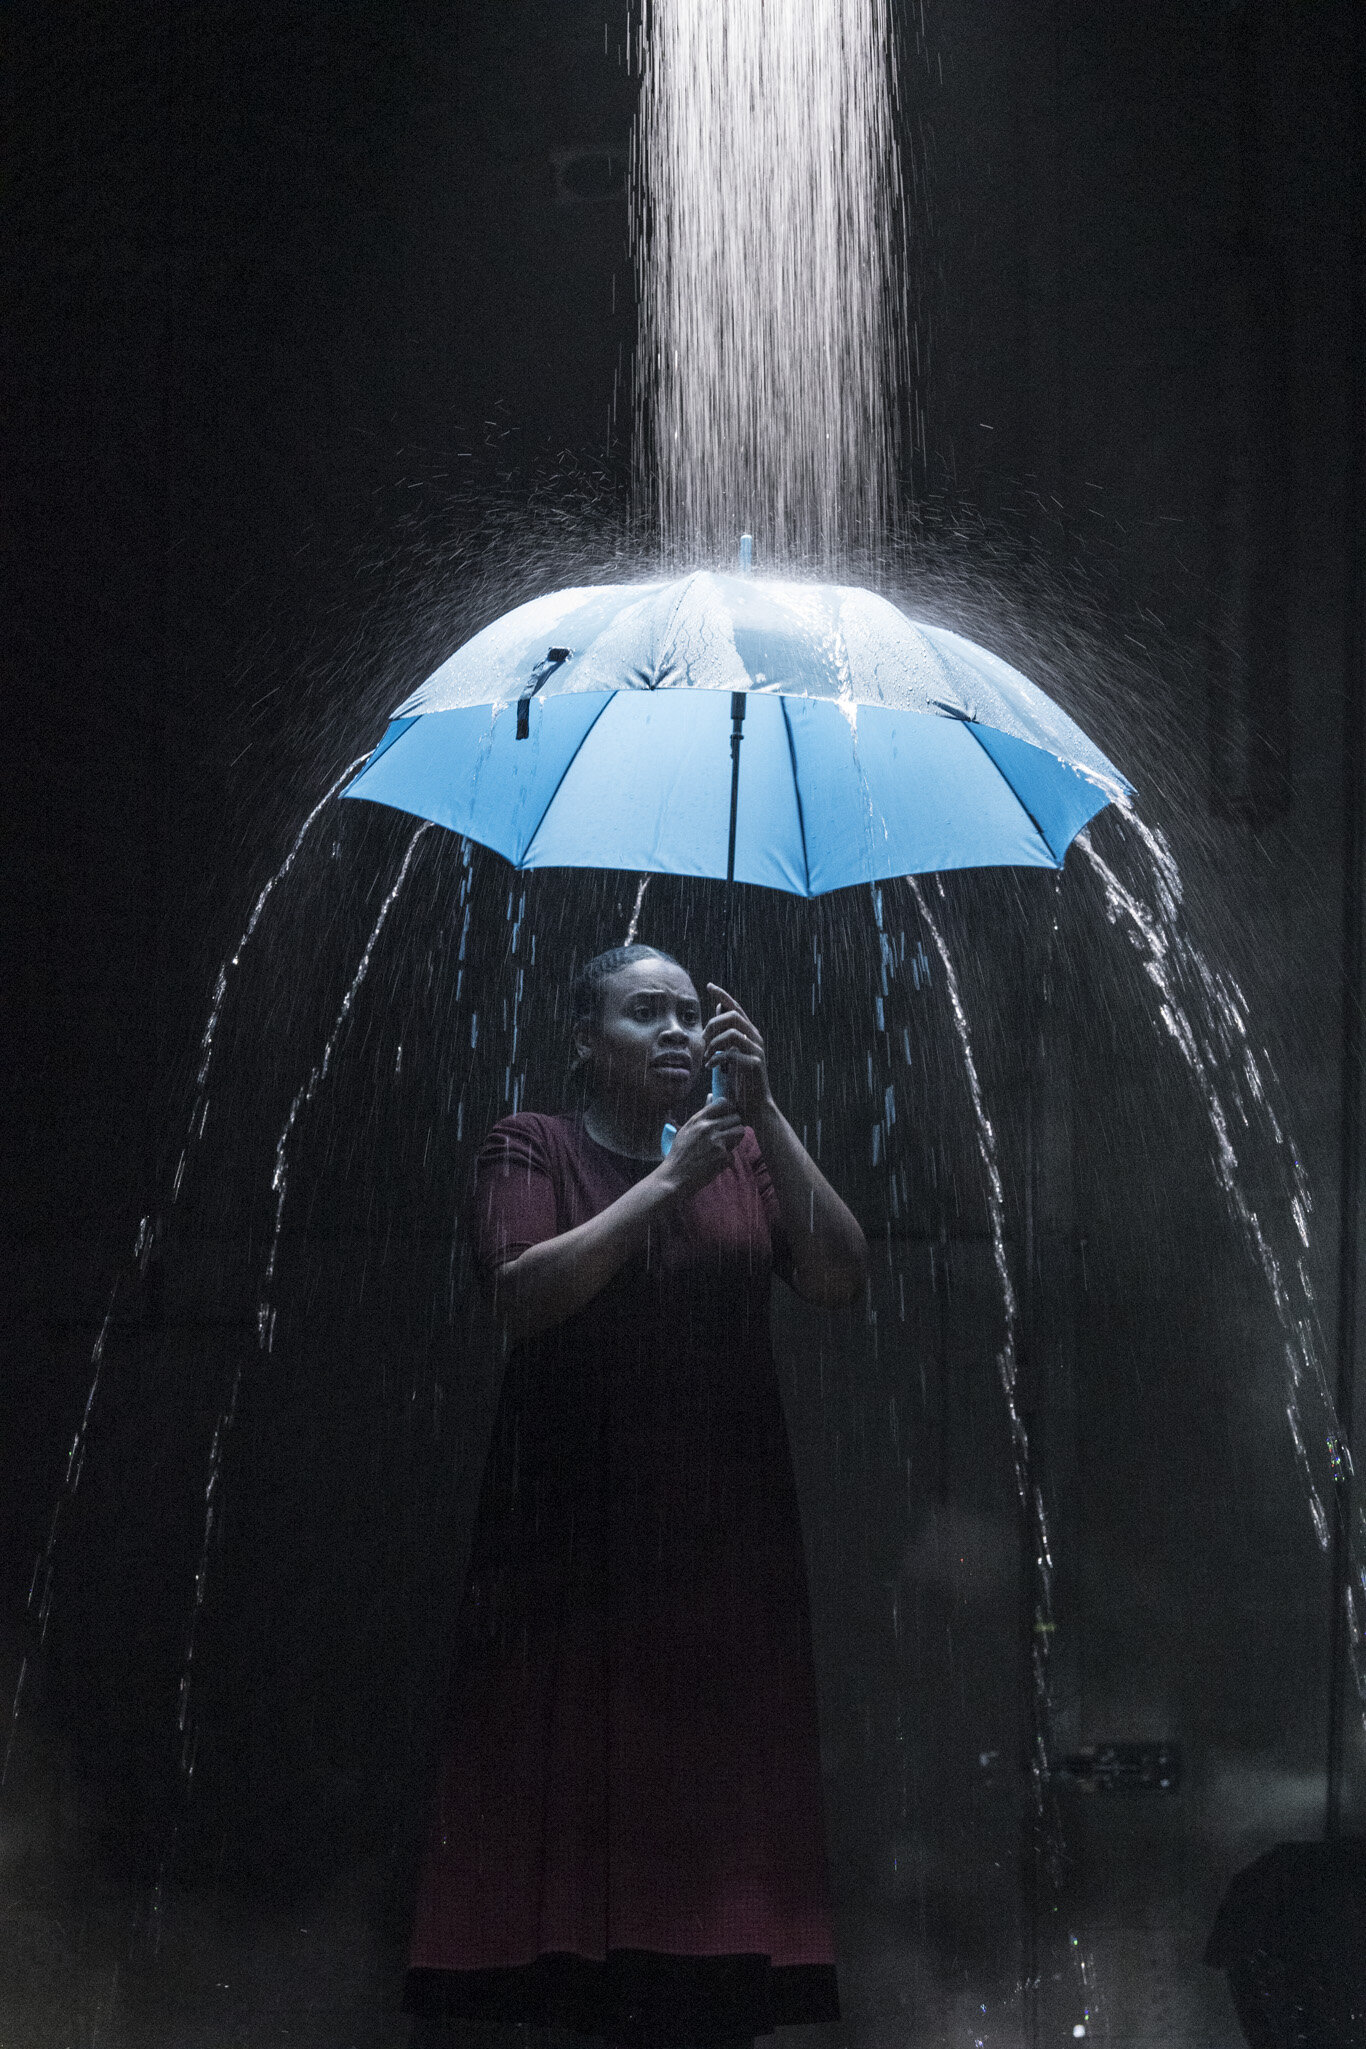  But the most stunning and evocative moments of the night came from soprano Jonelle Sills, whose scenes in both the car and the rain were commanding and moved me to tears. Sills played both a life destroyed and a life restored all to absolute perfect